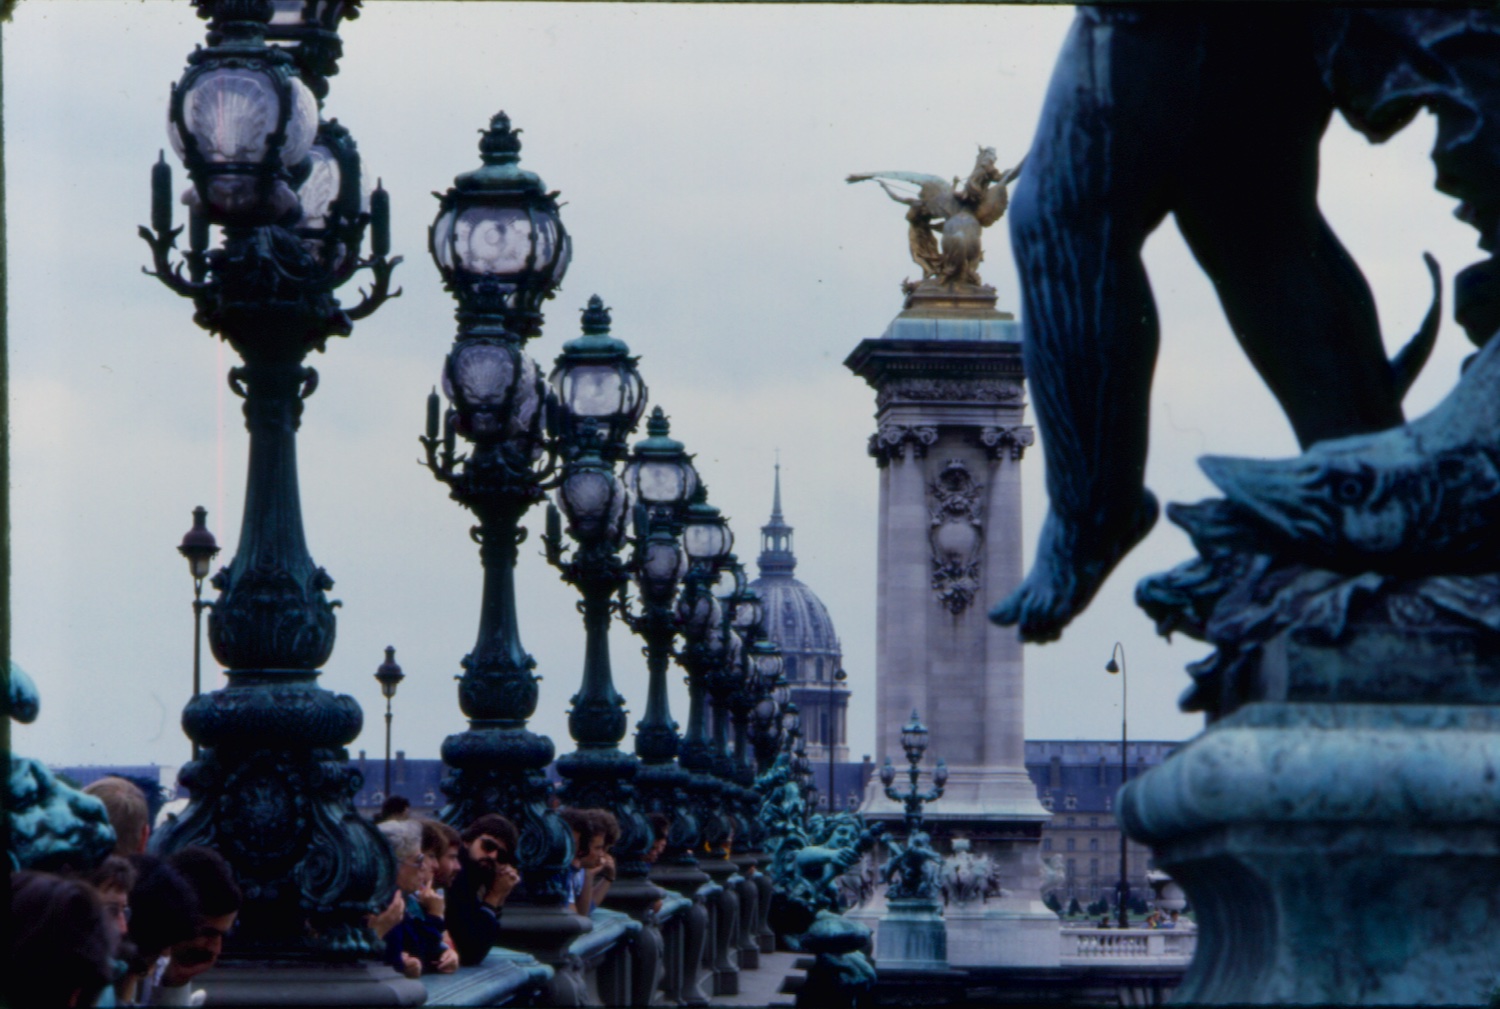 paris scene from the film A View to a Kill